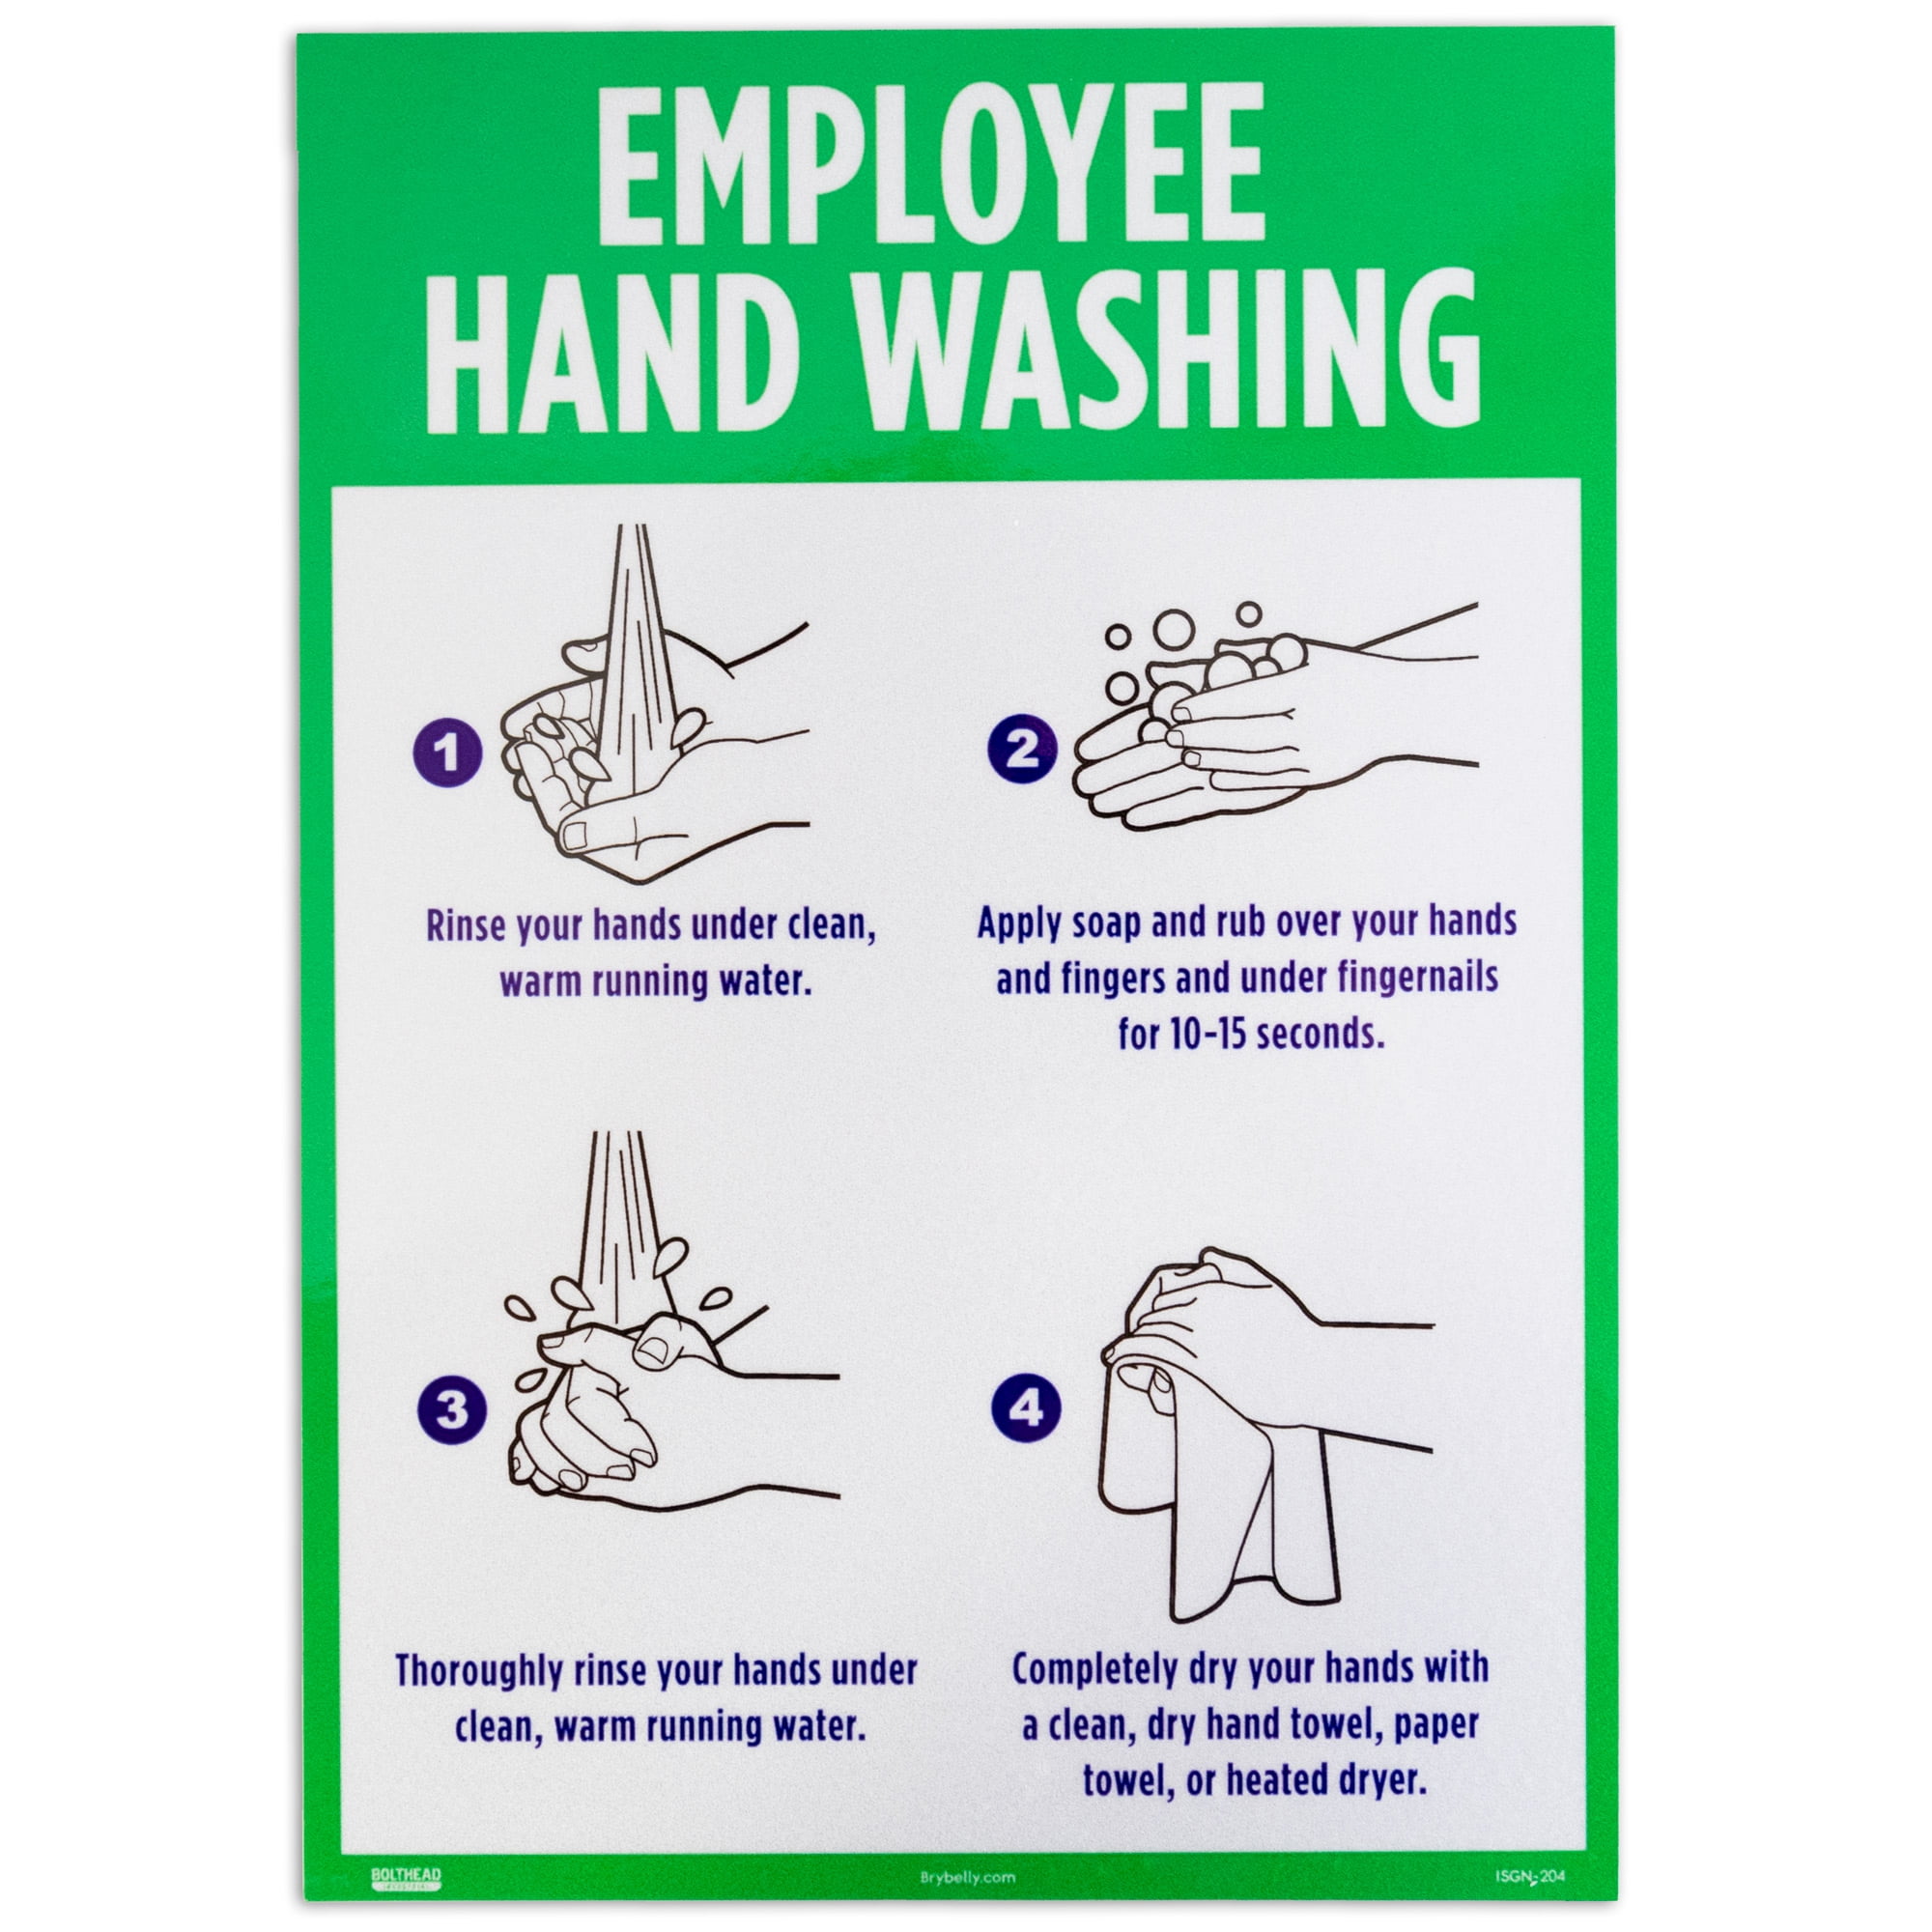 employee-hand-washing-decal-sign-public-restroom-or-kitchen-sink